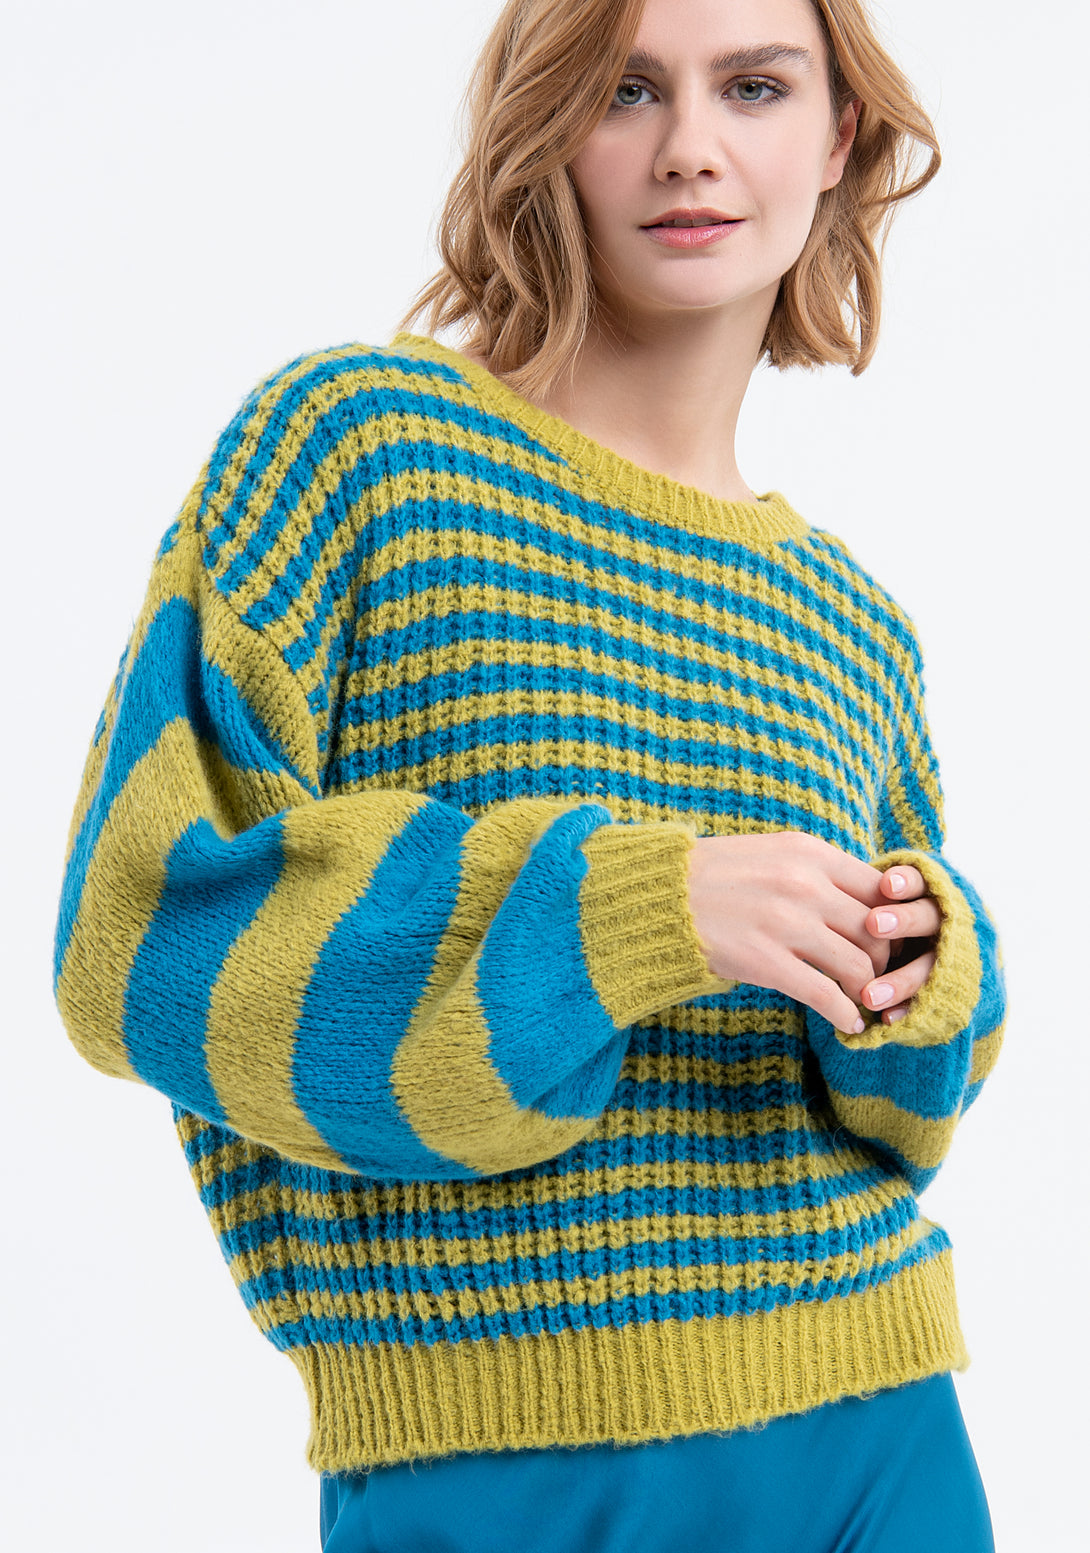 Knitwear over fit with stripes